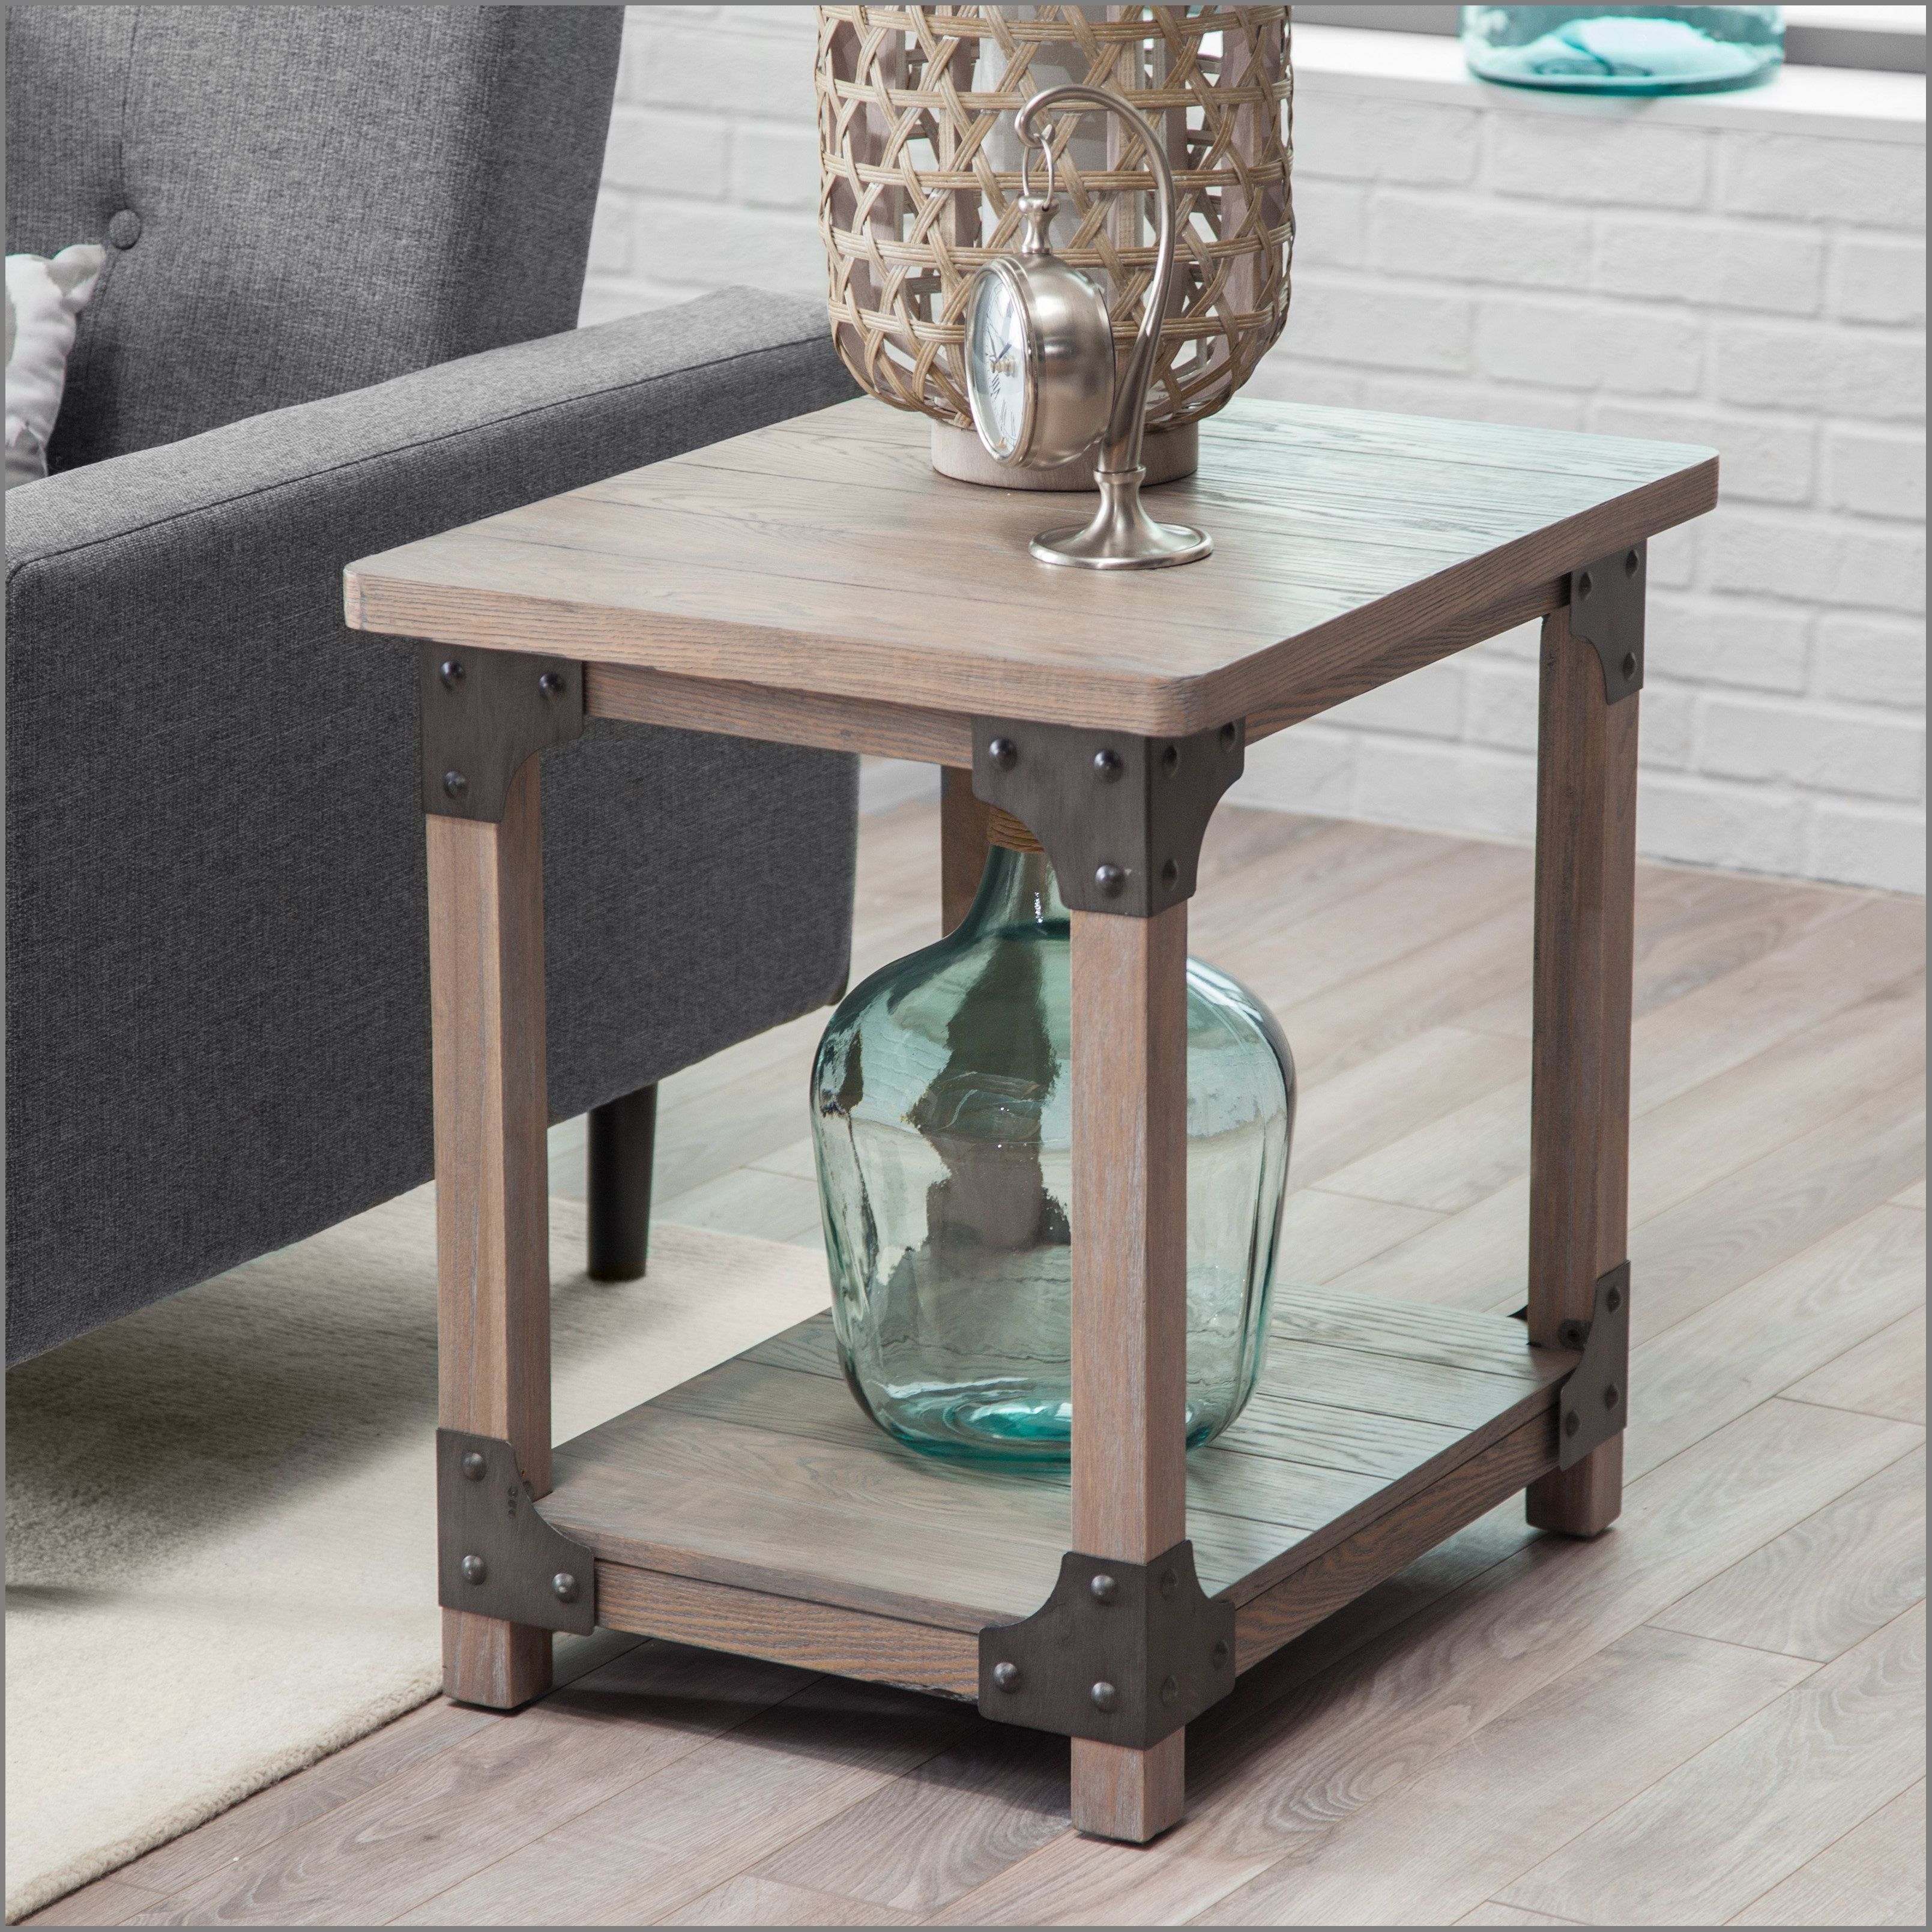 modern furniture pomona rustic natural coffee table the beautifull round wood side terrific amazing and end tables tan brown sofa new glass top ethan allen circular ashley toletta